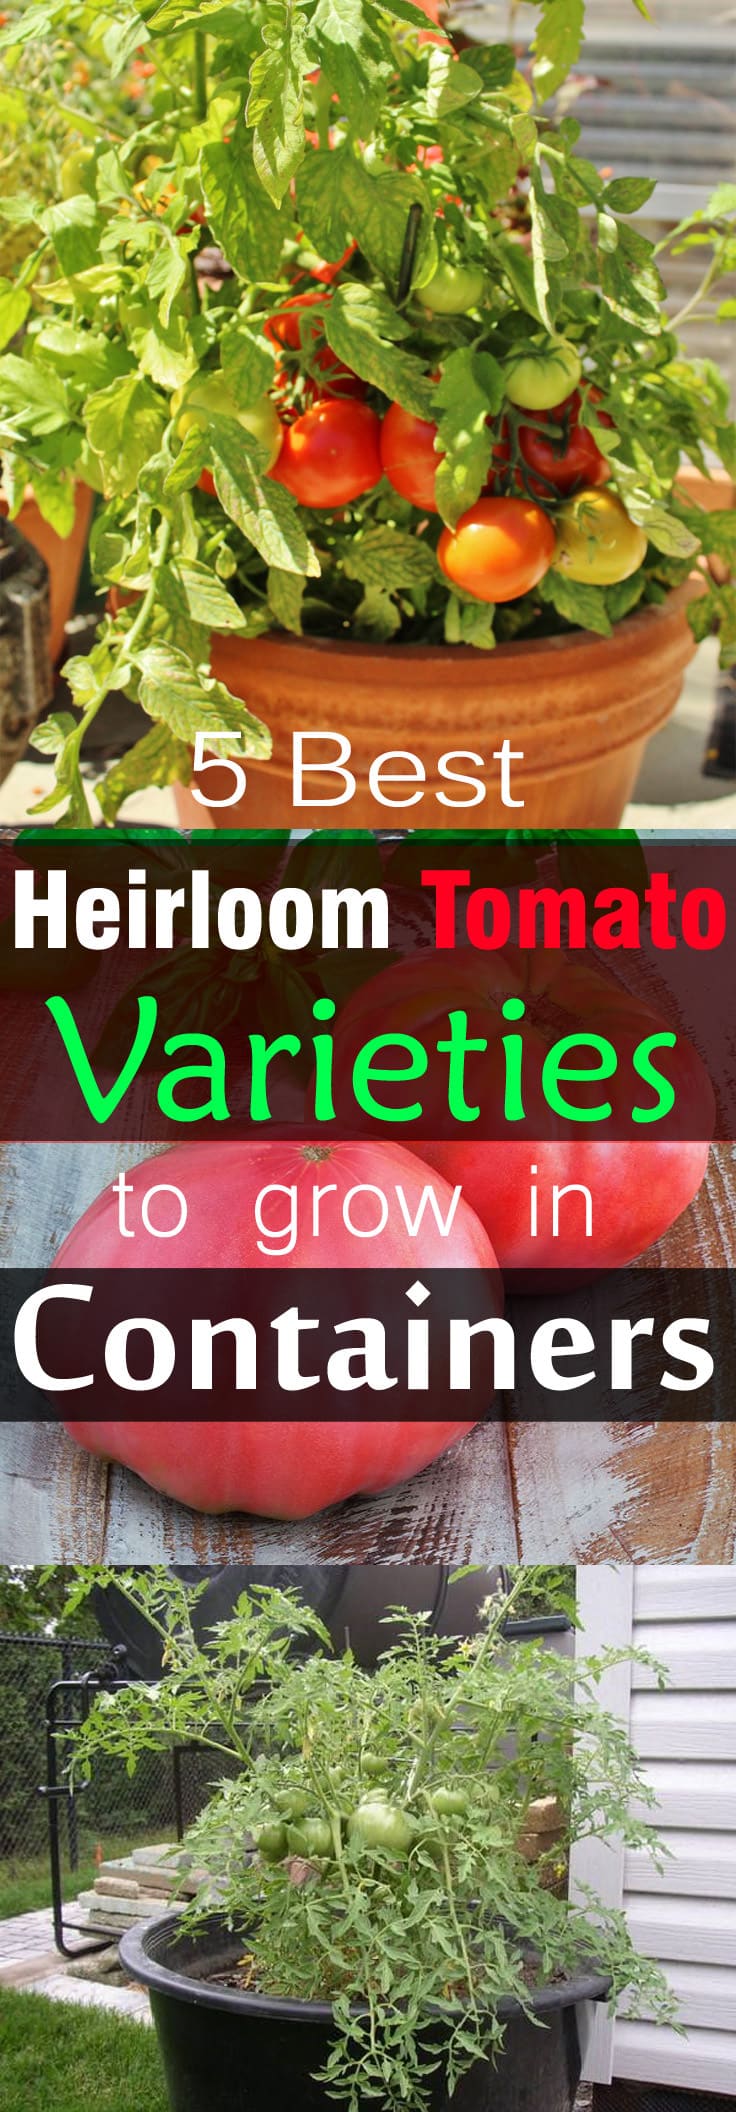 Growing heirloom tomatoes in pots is possible. Here's a list of 5 best varieties you can try. Check out!